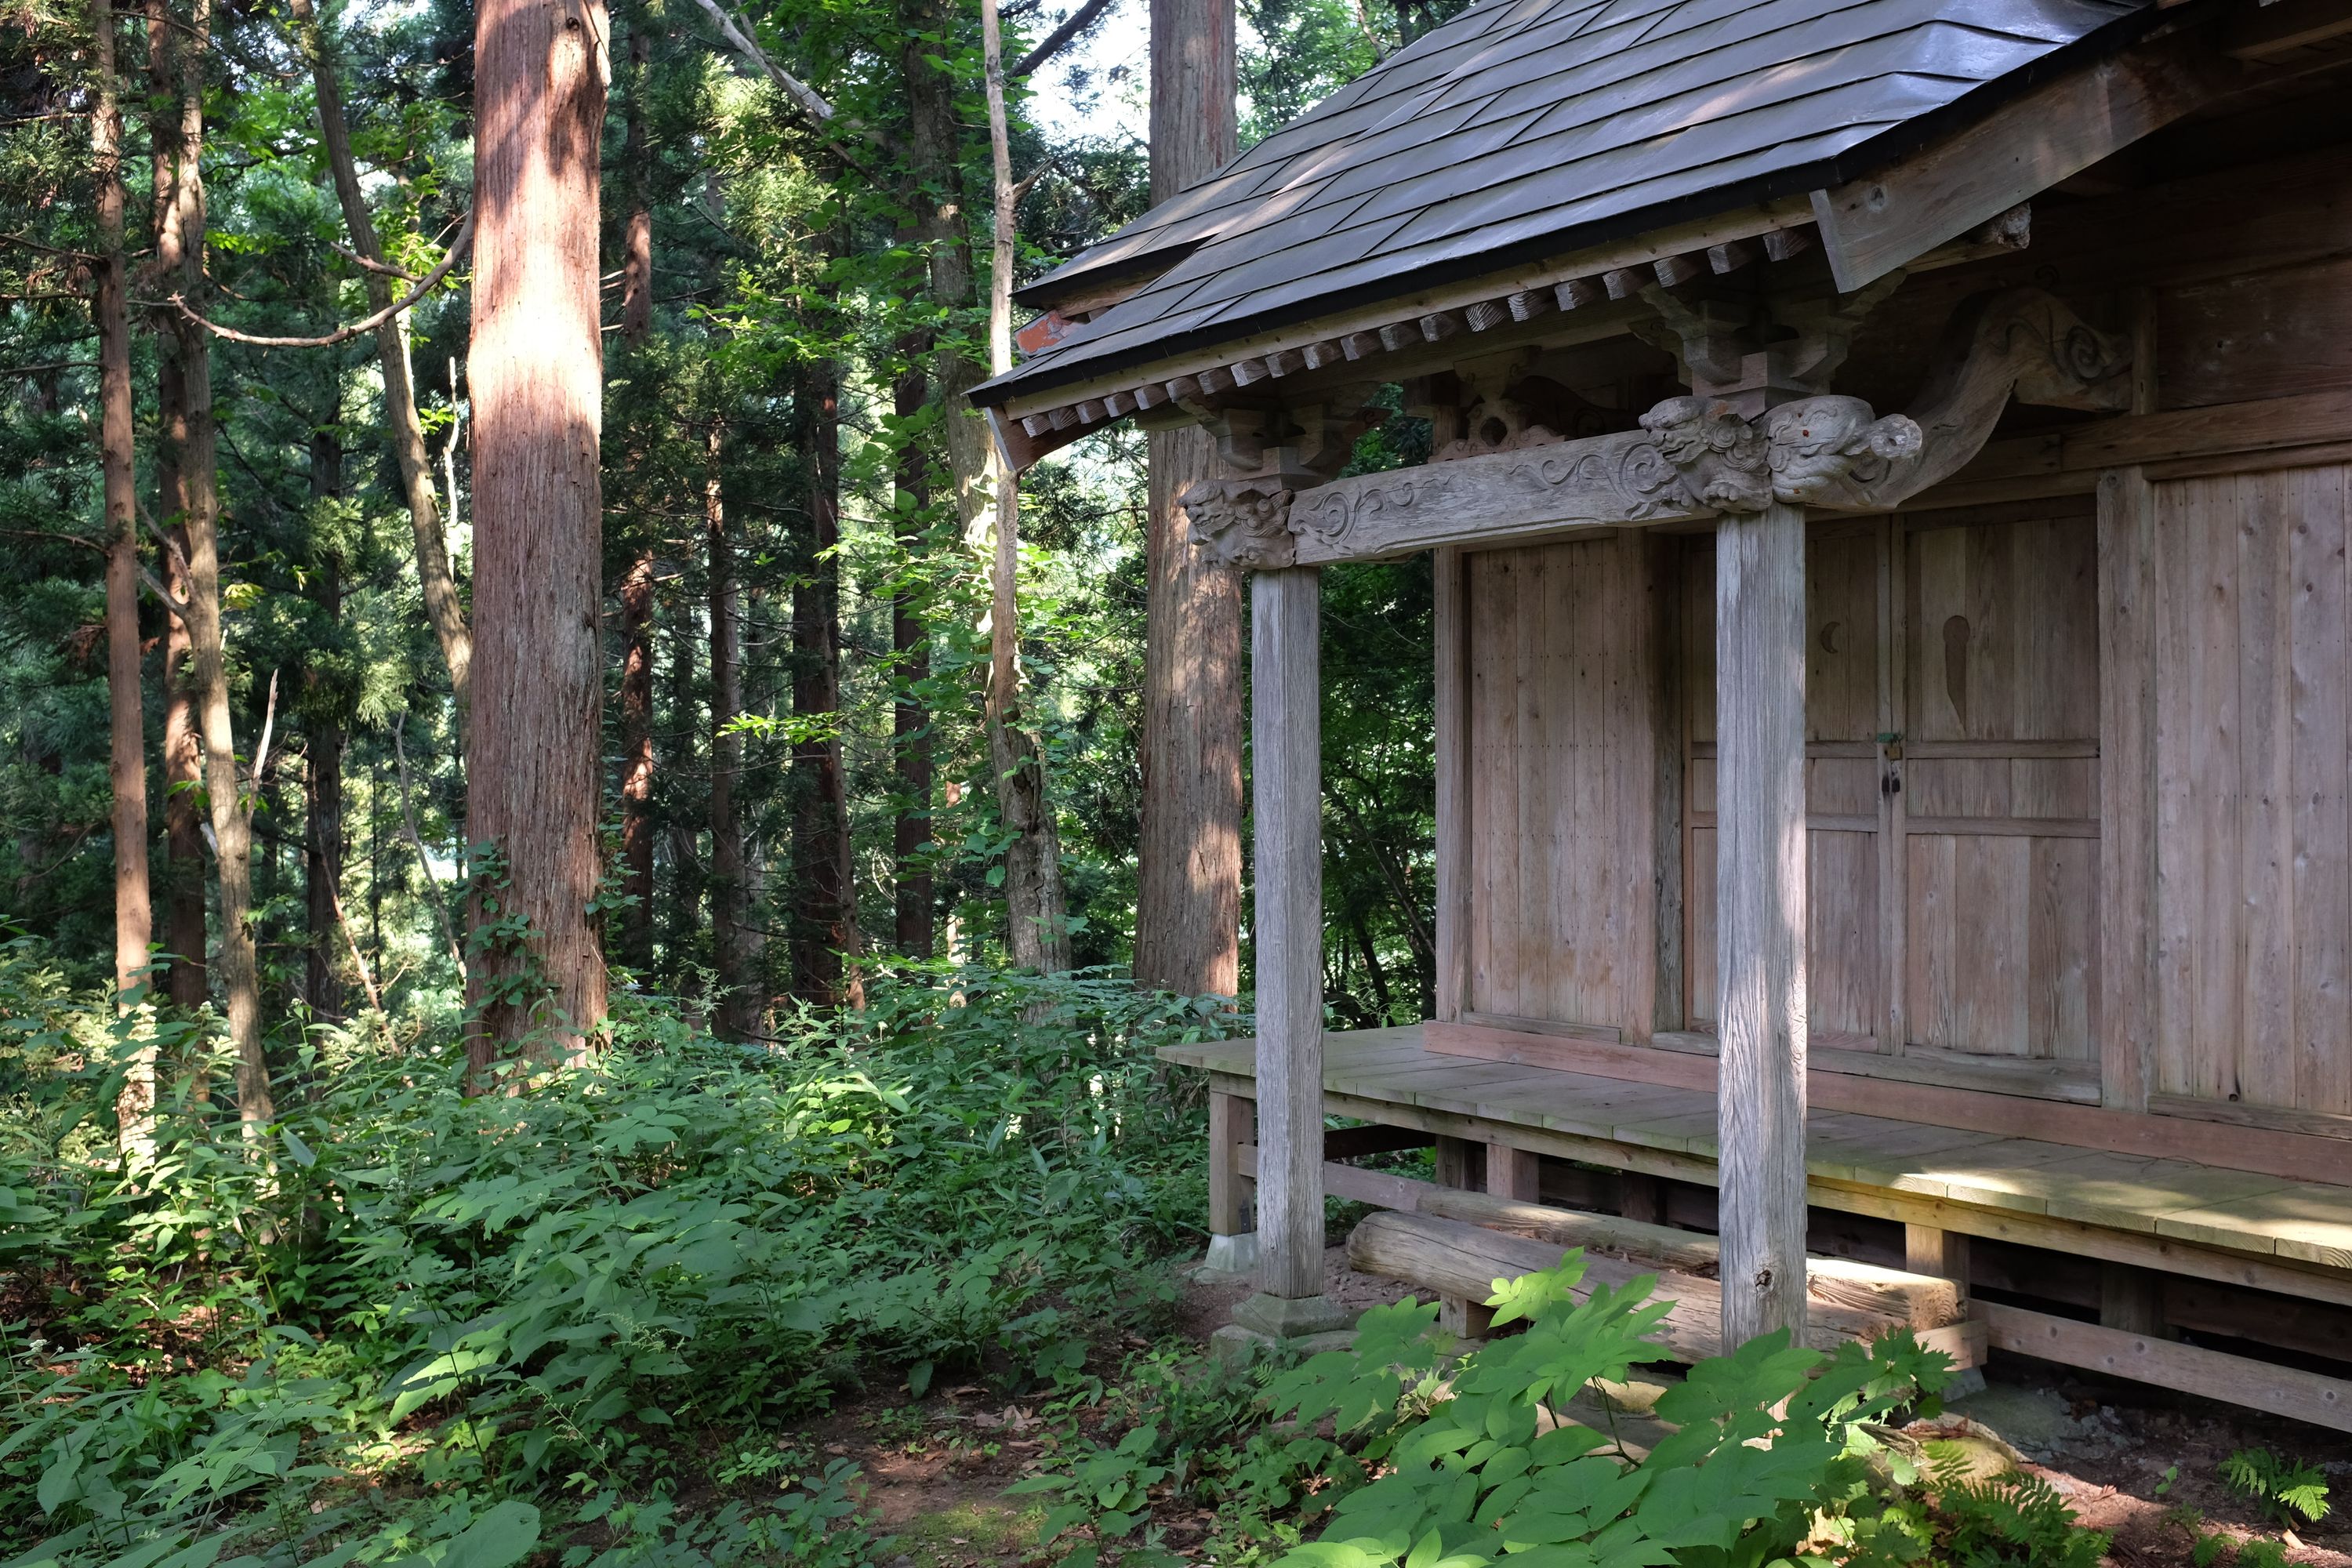 A small wooden shrine in a forest.